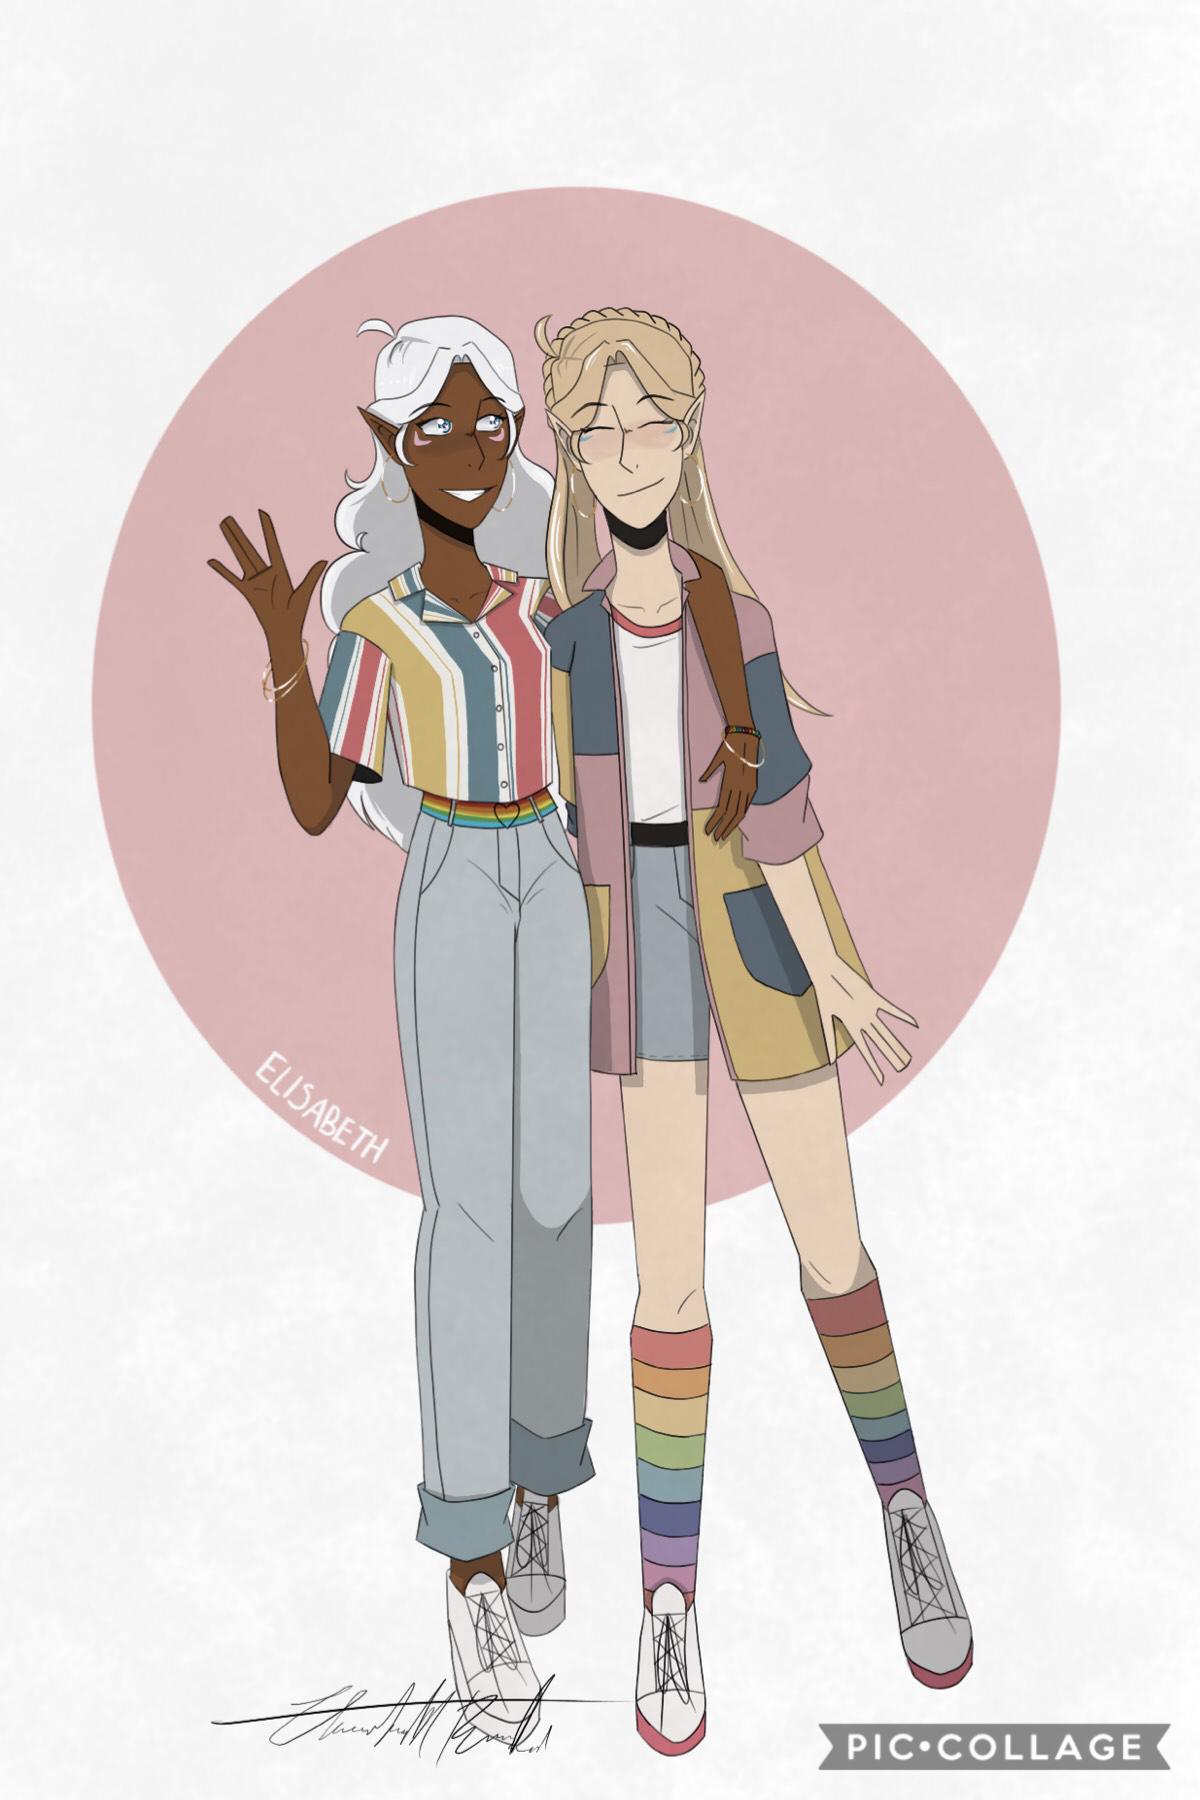 tap tap

so i found some cute outfits while i was look for something (i can't remember what) on pinterest and decided to draw allura and romelle in them